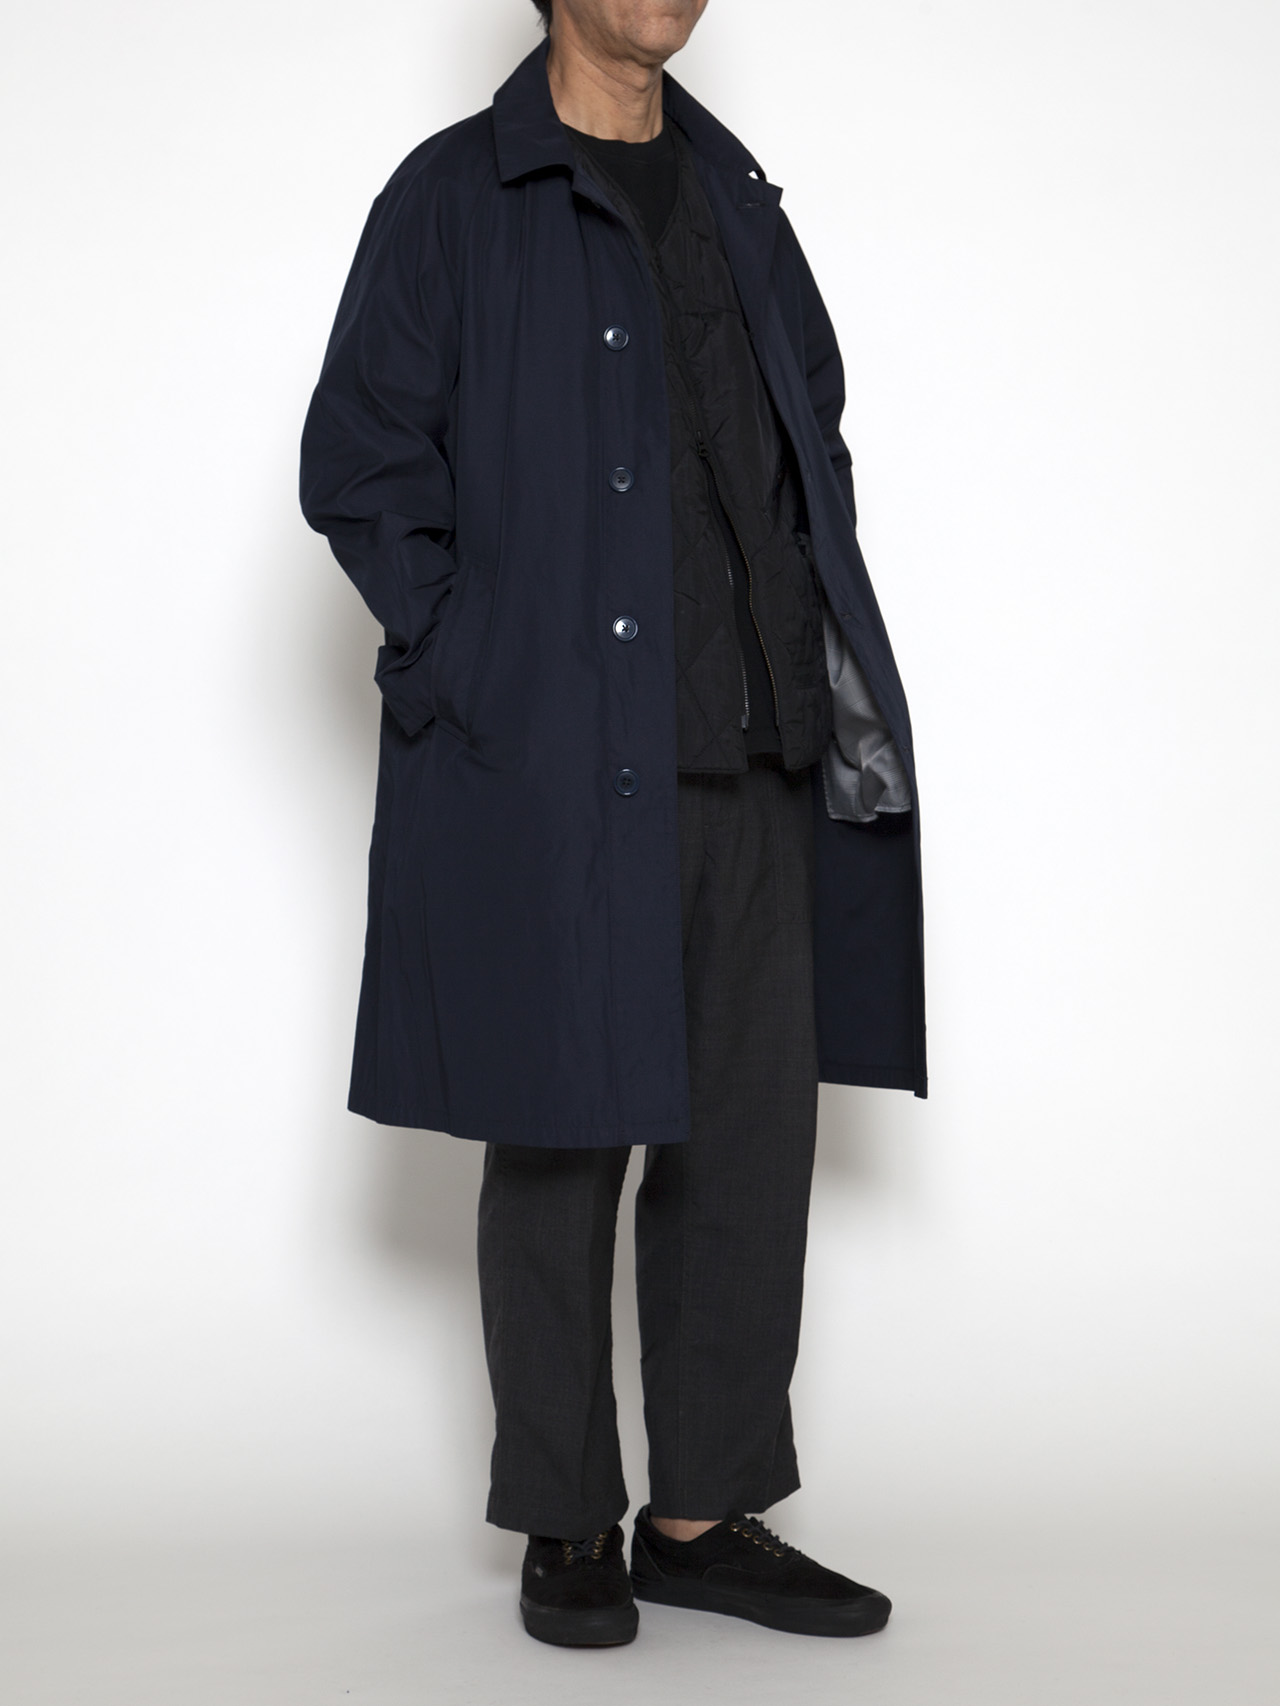 DELIVERY】CJ027L – UP DUSTER COAT | SPECIAL